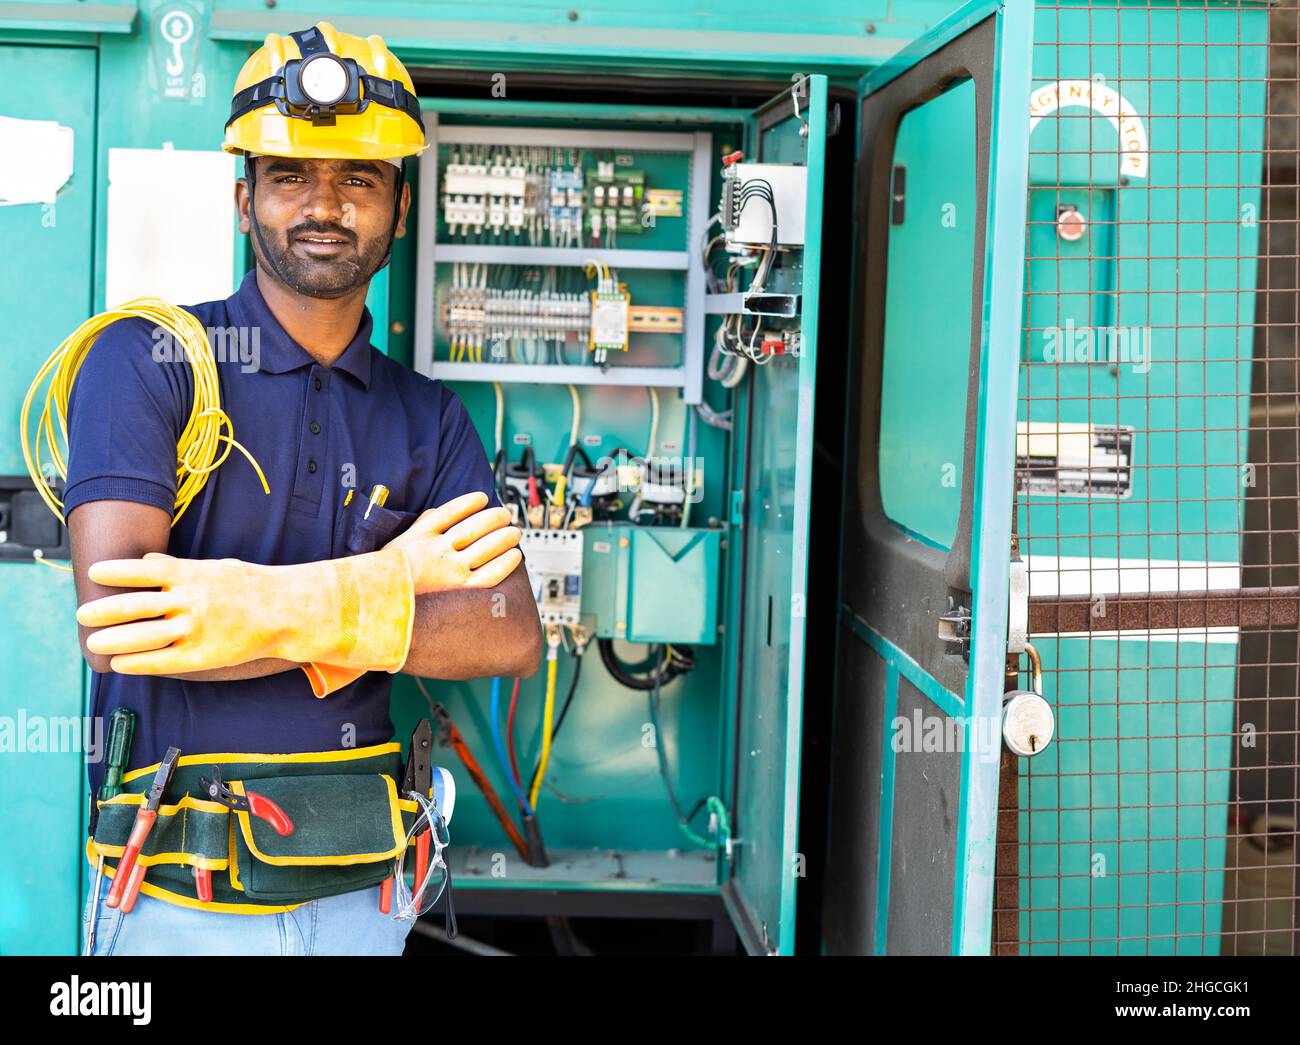 happy smiling Electrician with crossed arms and safety precautions standing by looking at camera - concept of skilled professional occupation Stock Photo